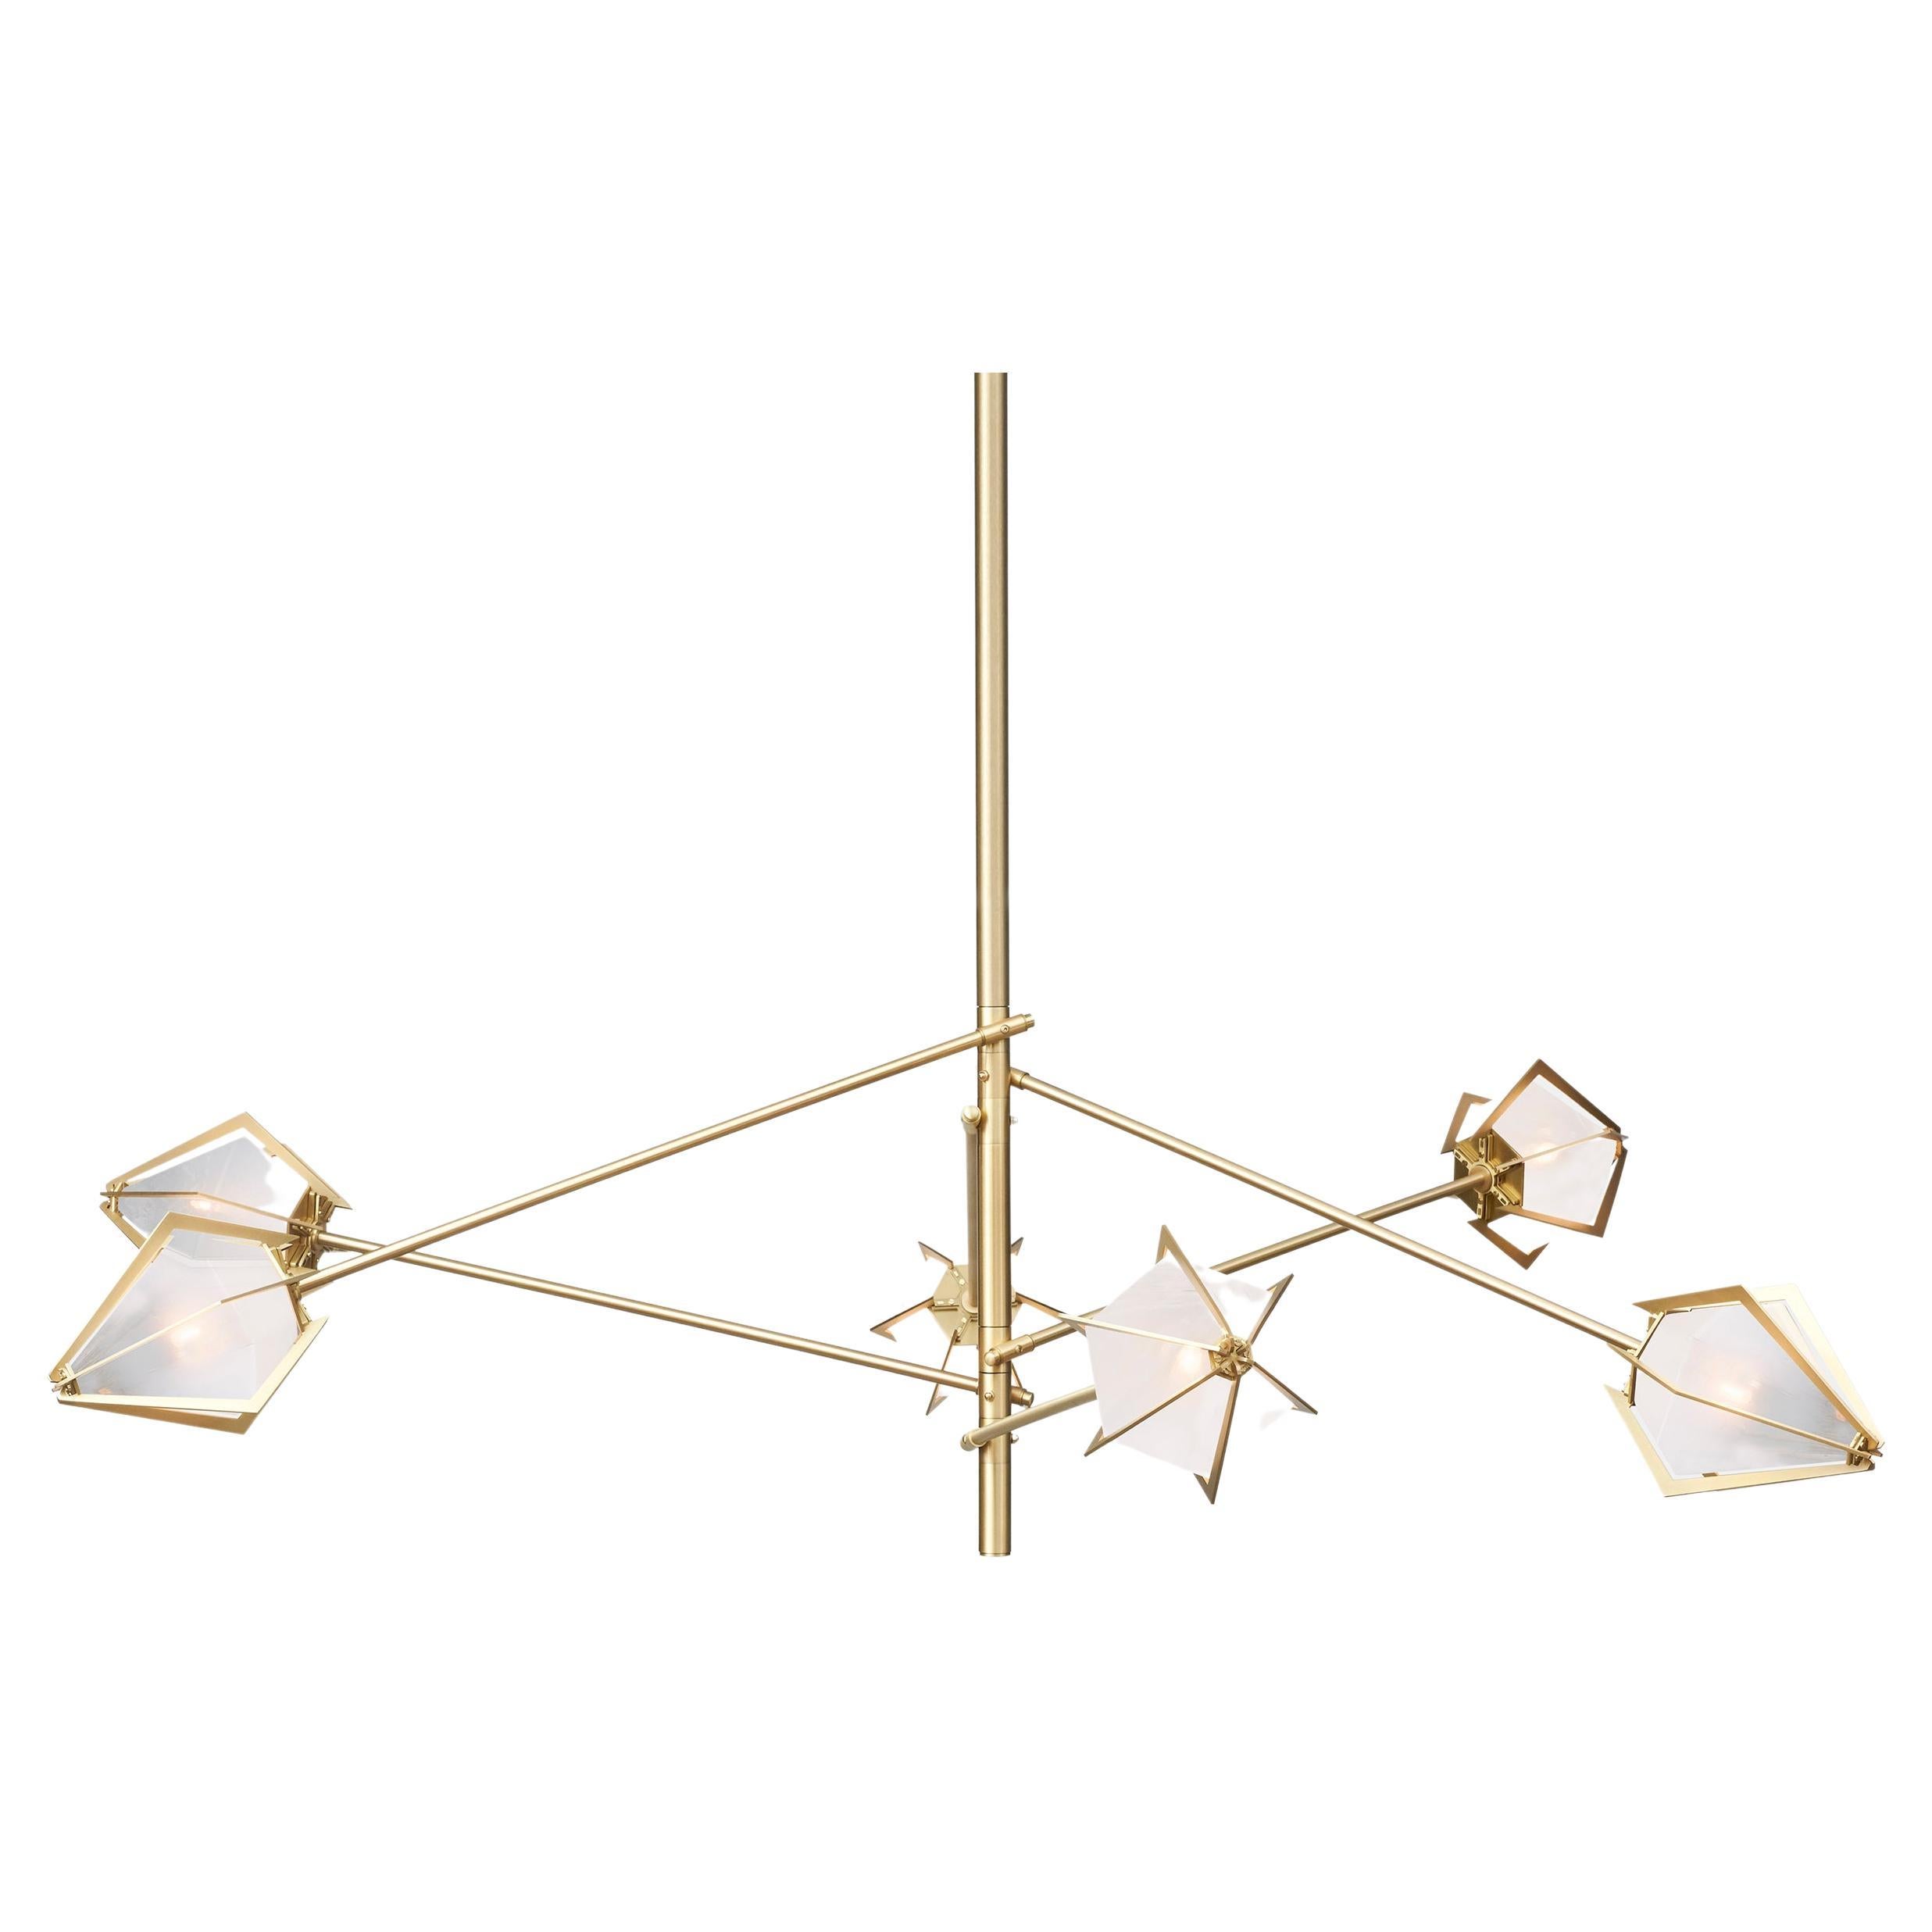 Harlow Spoke Chandelier Large in Satin Brass and Alabaster White Glass